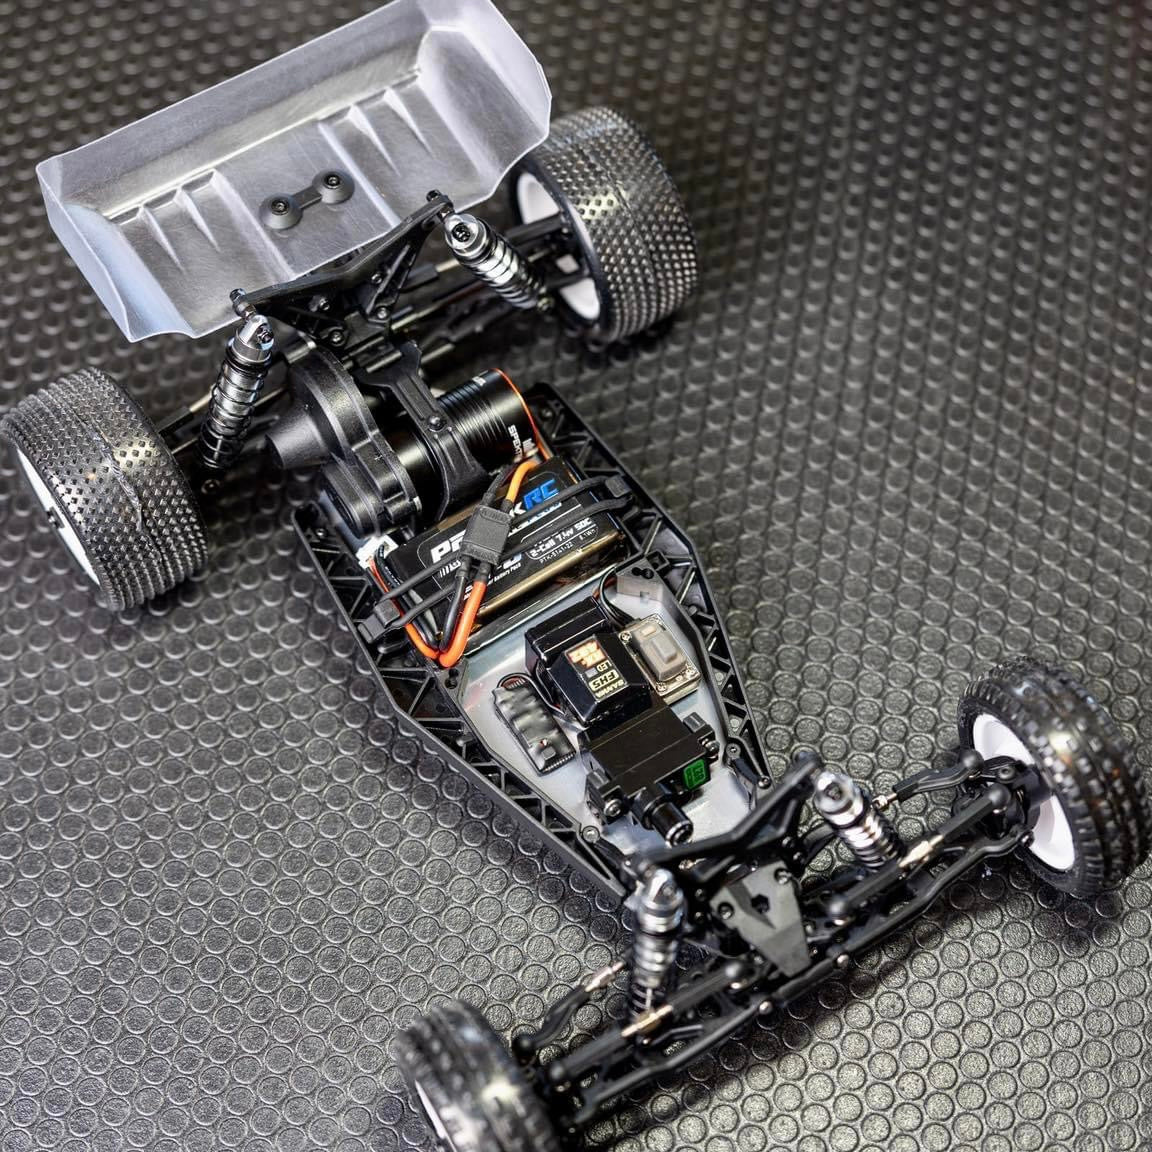 The 1up Equipped Mini-B is Ready for the Track